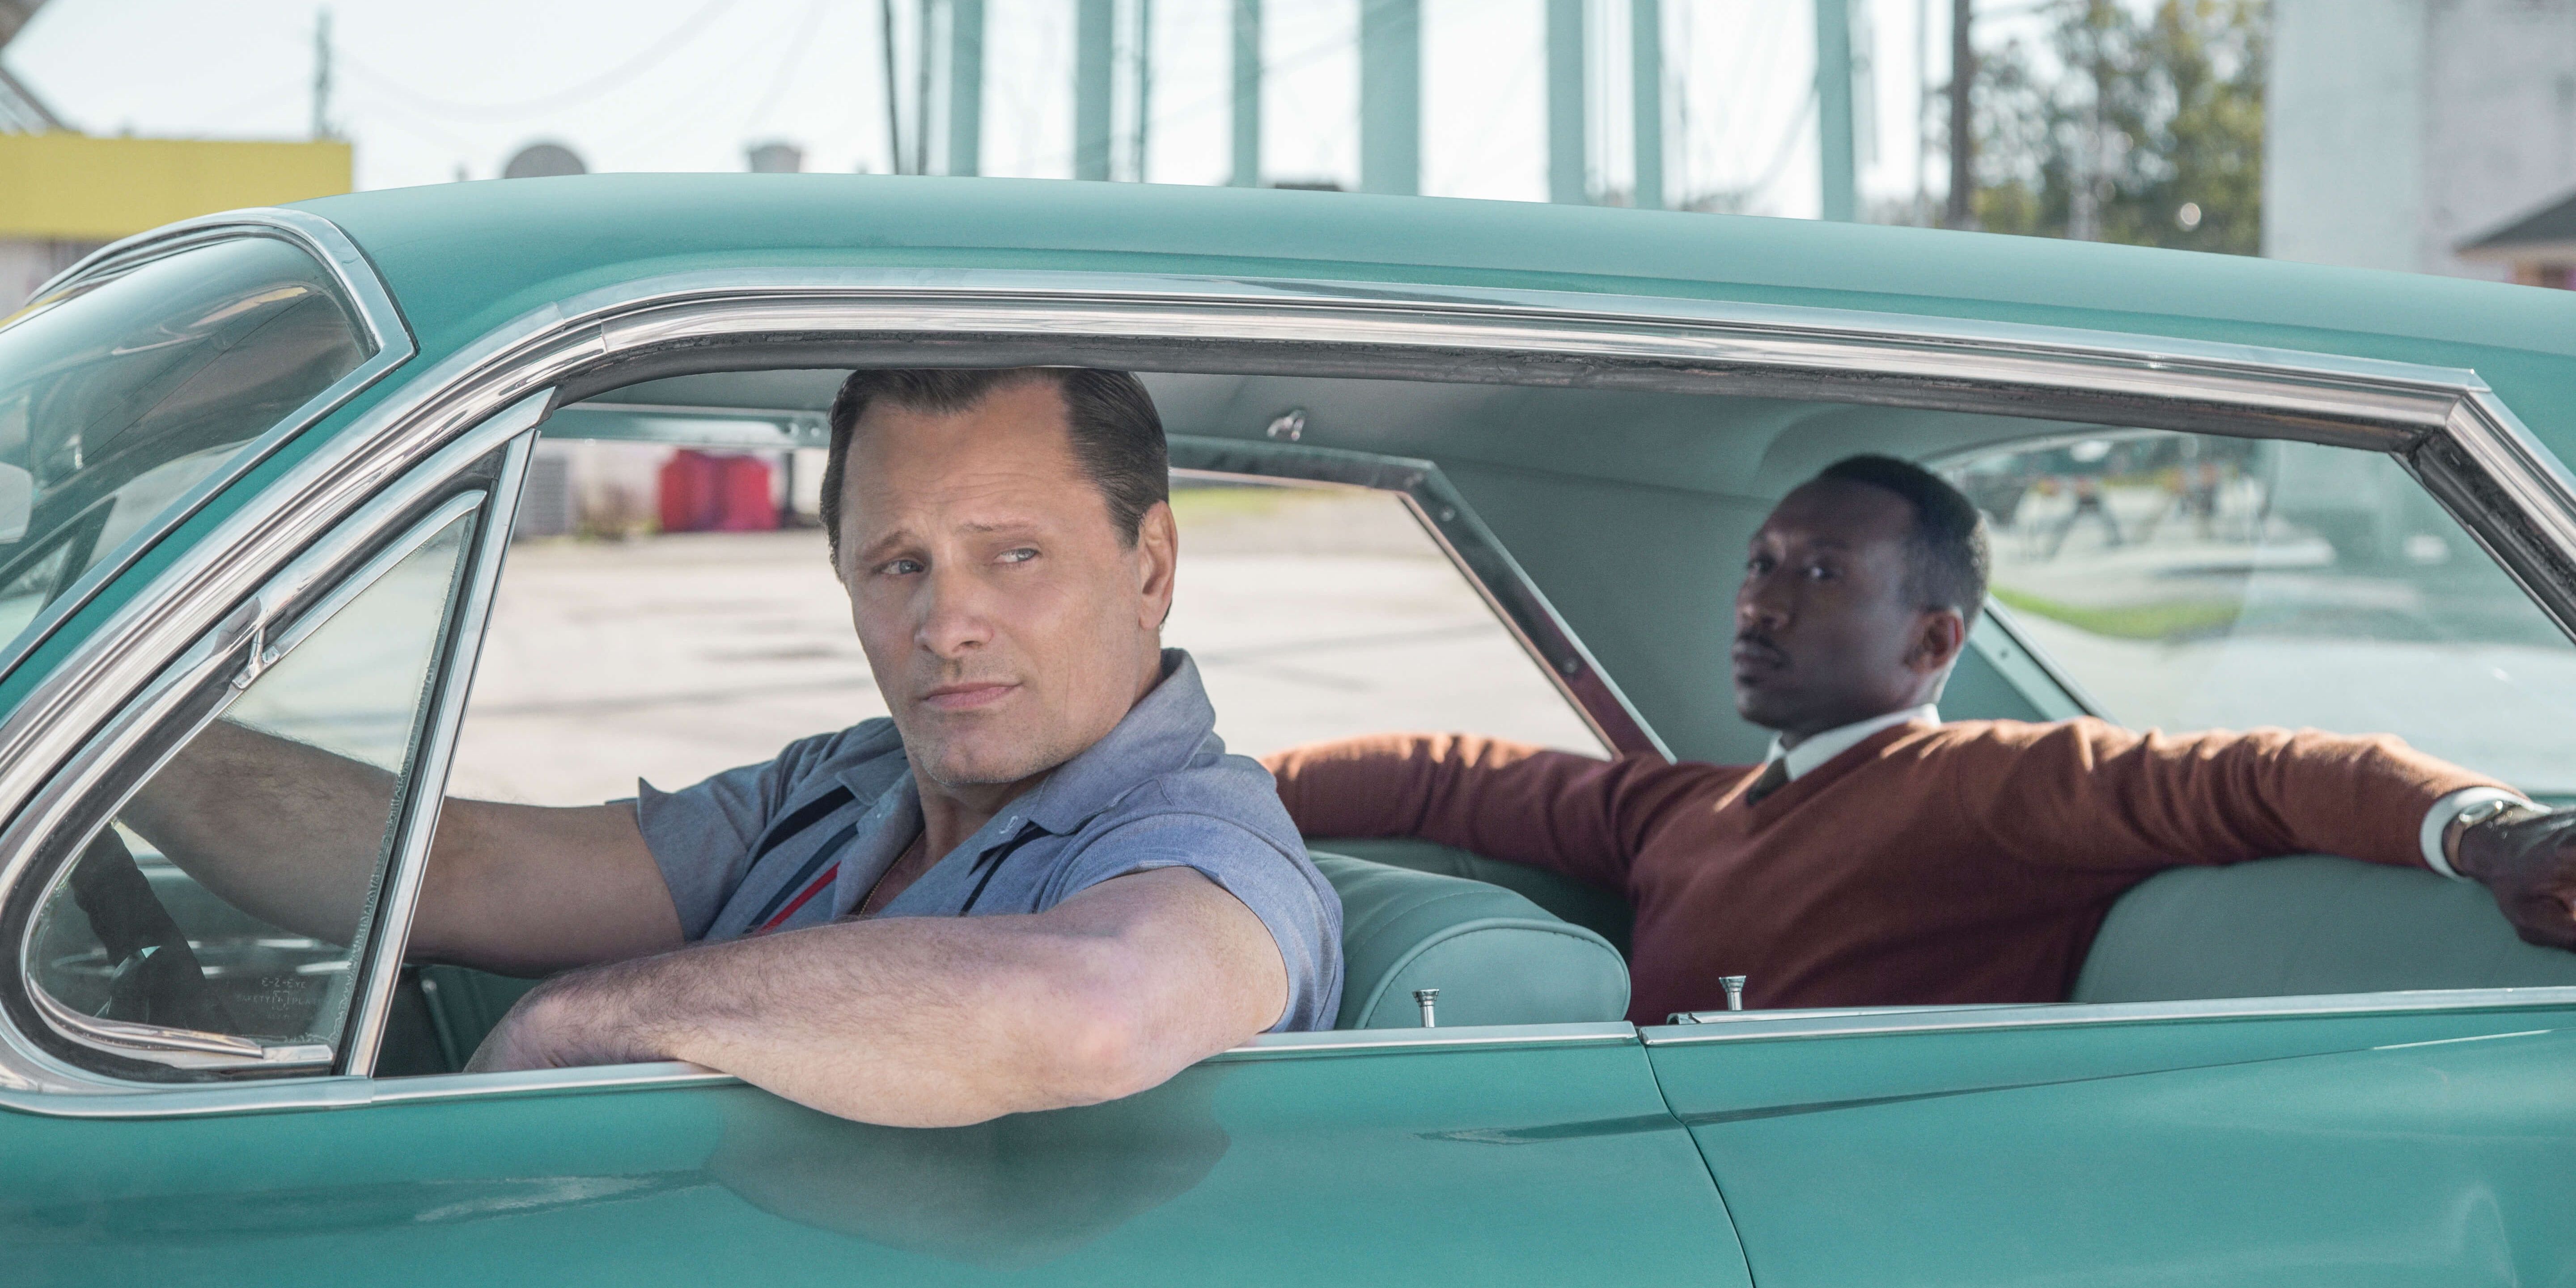 Viggo Mortensen and Mahershala Ali sitting inside the iconic turquoise Cadillac car in Green Book